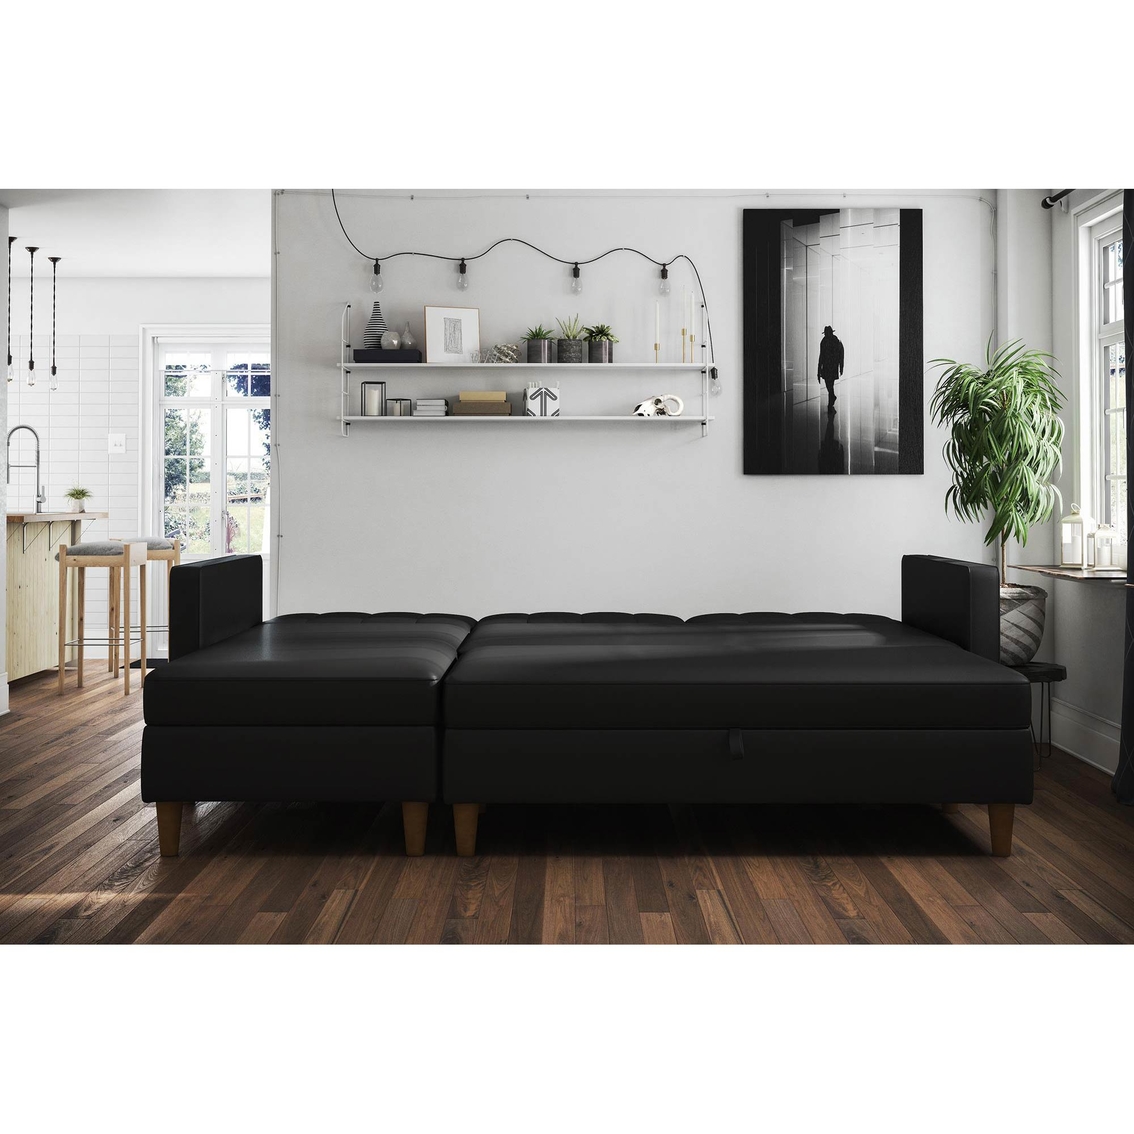 DHP Hartford Storage Sectional Futon with Chaise - Image 3 of 4